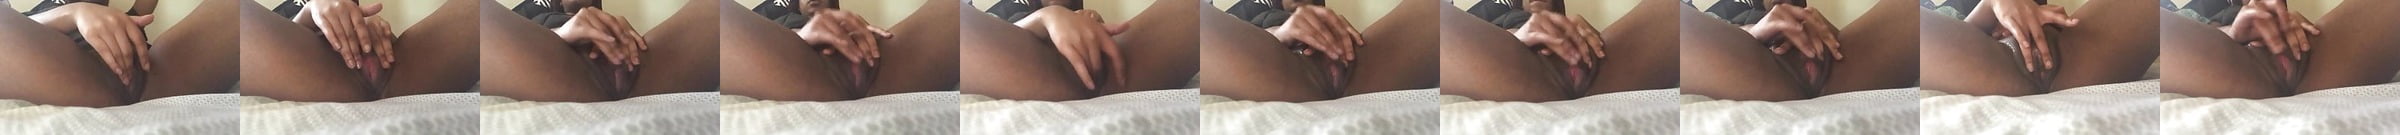 Ebony Butthole Winking Orgasm Contractions At 3 46 Porn A4